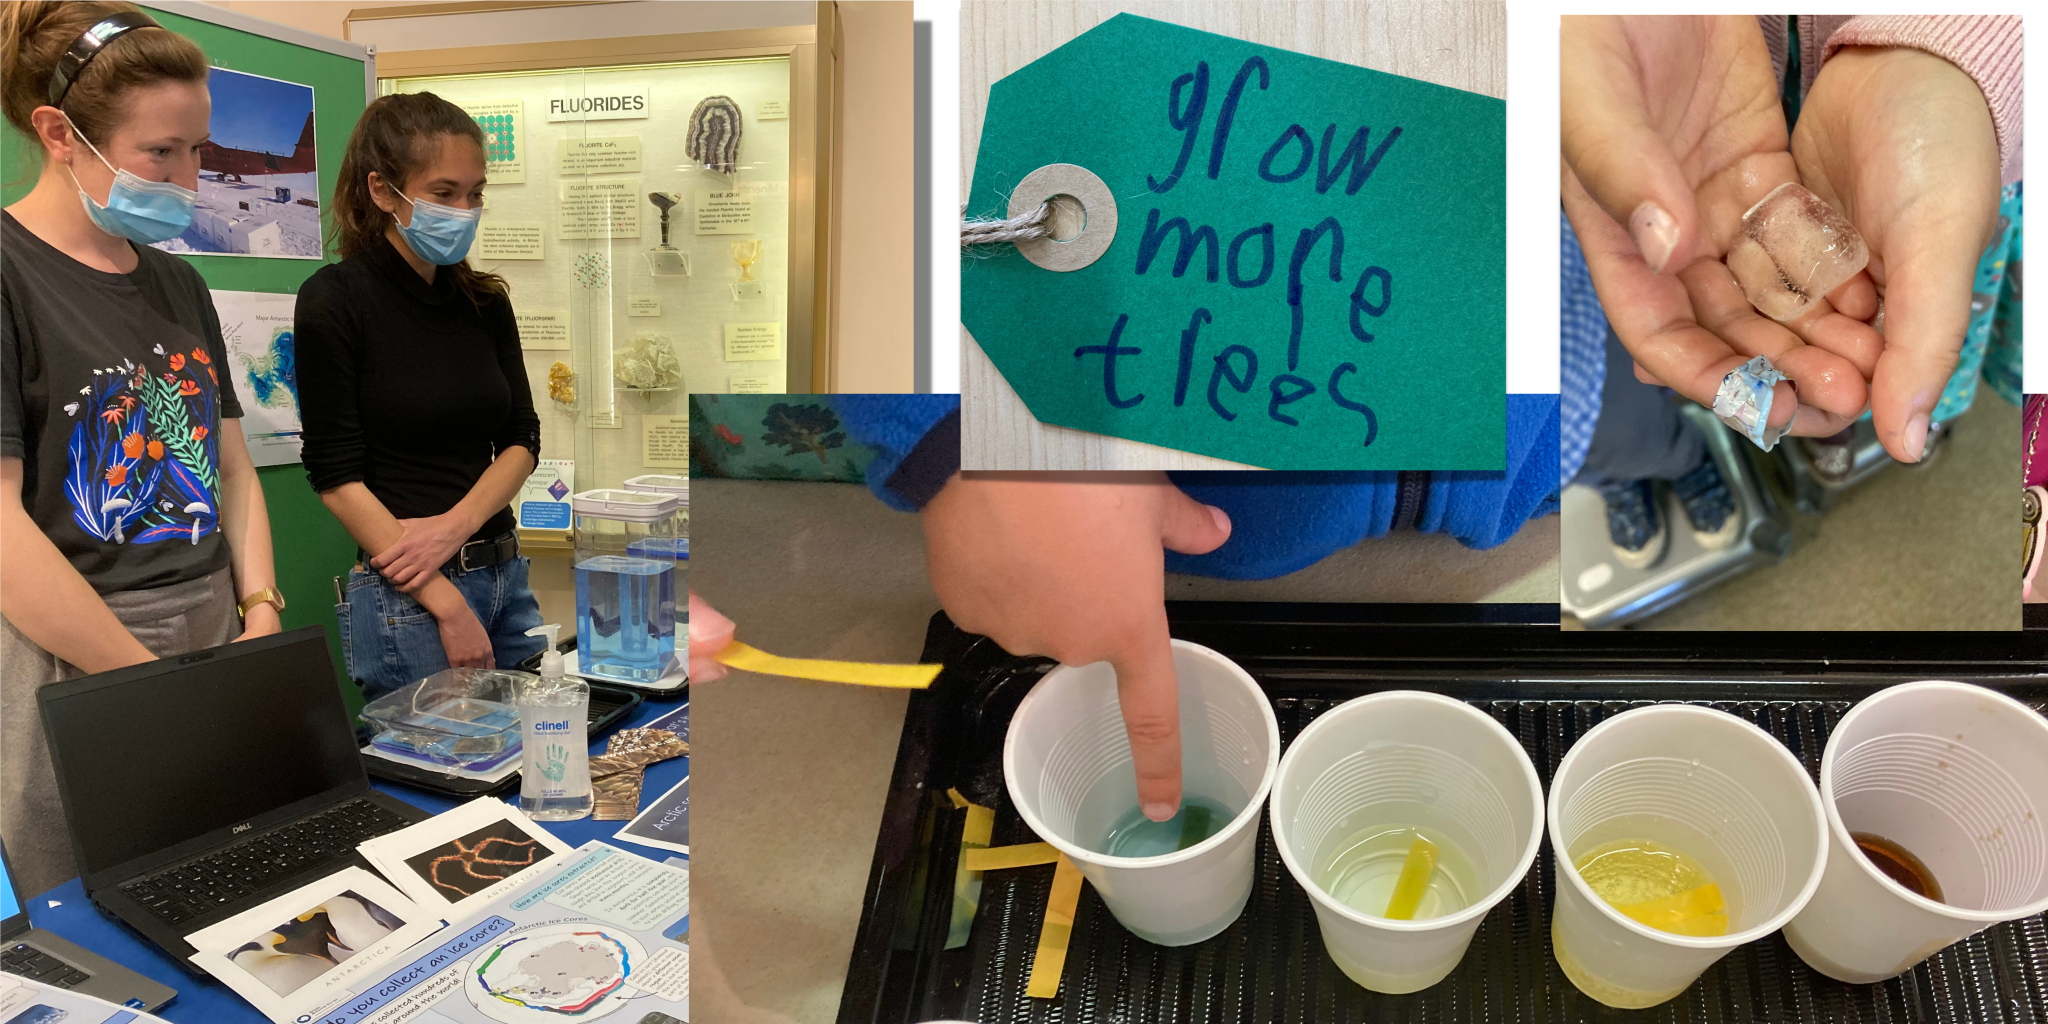 Photos of women standing at ice core stand, child holding ice, testing pH in beakers & label drawn by child saying 'grow more trees'